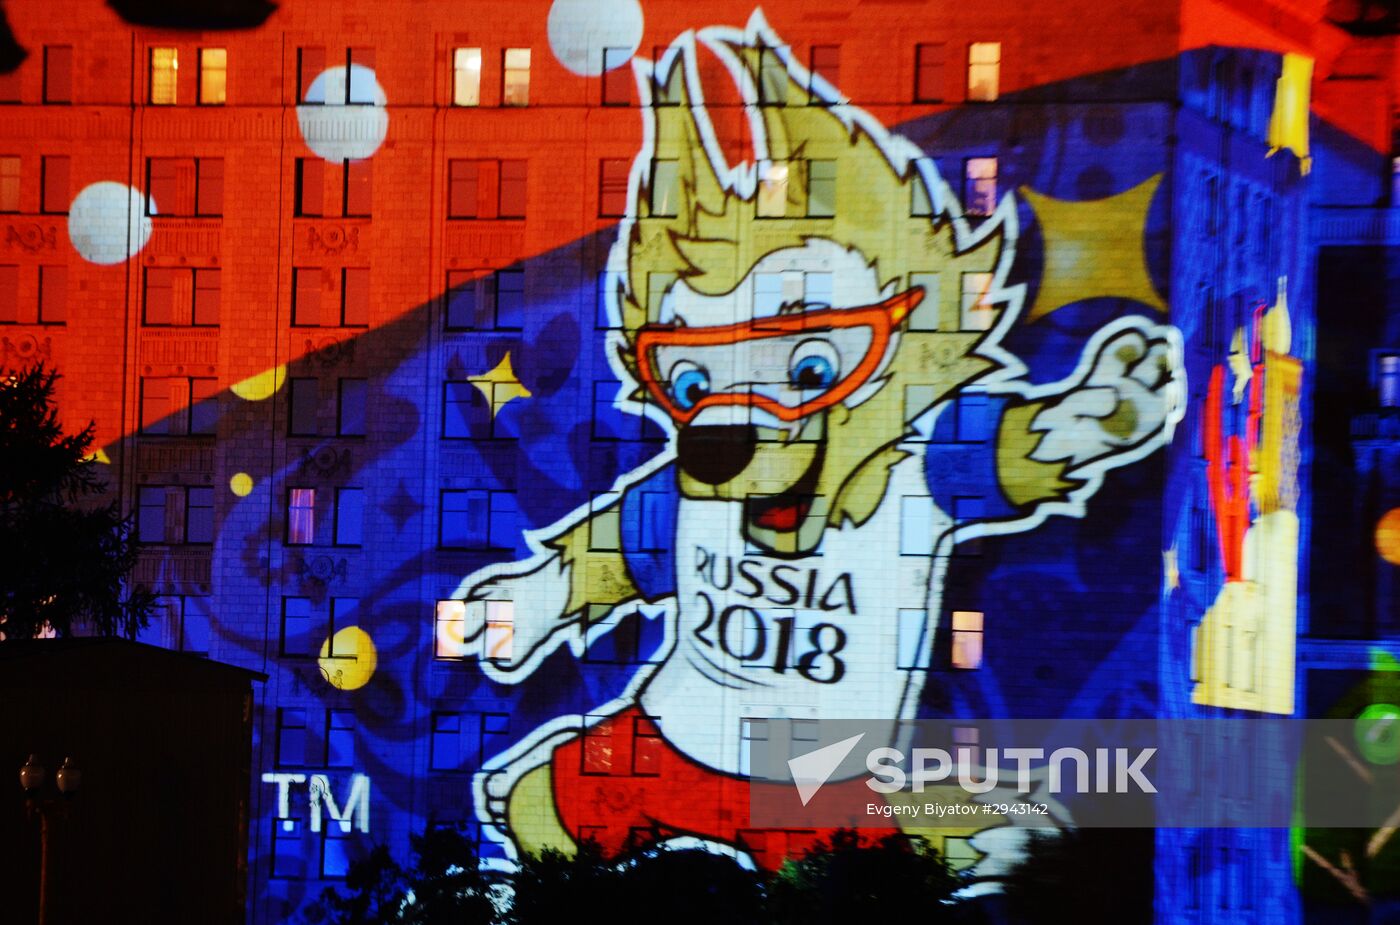 Presentation of official mascot for FIFA 2018 World Cup Russia